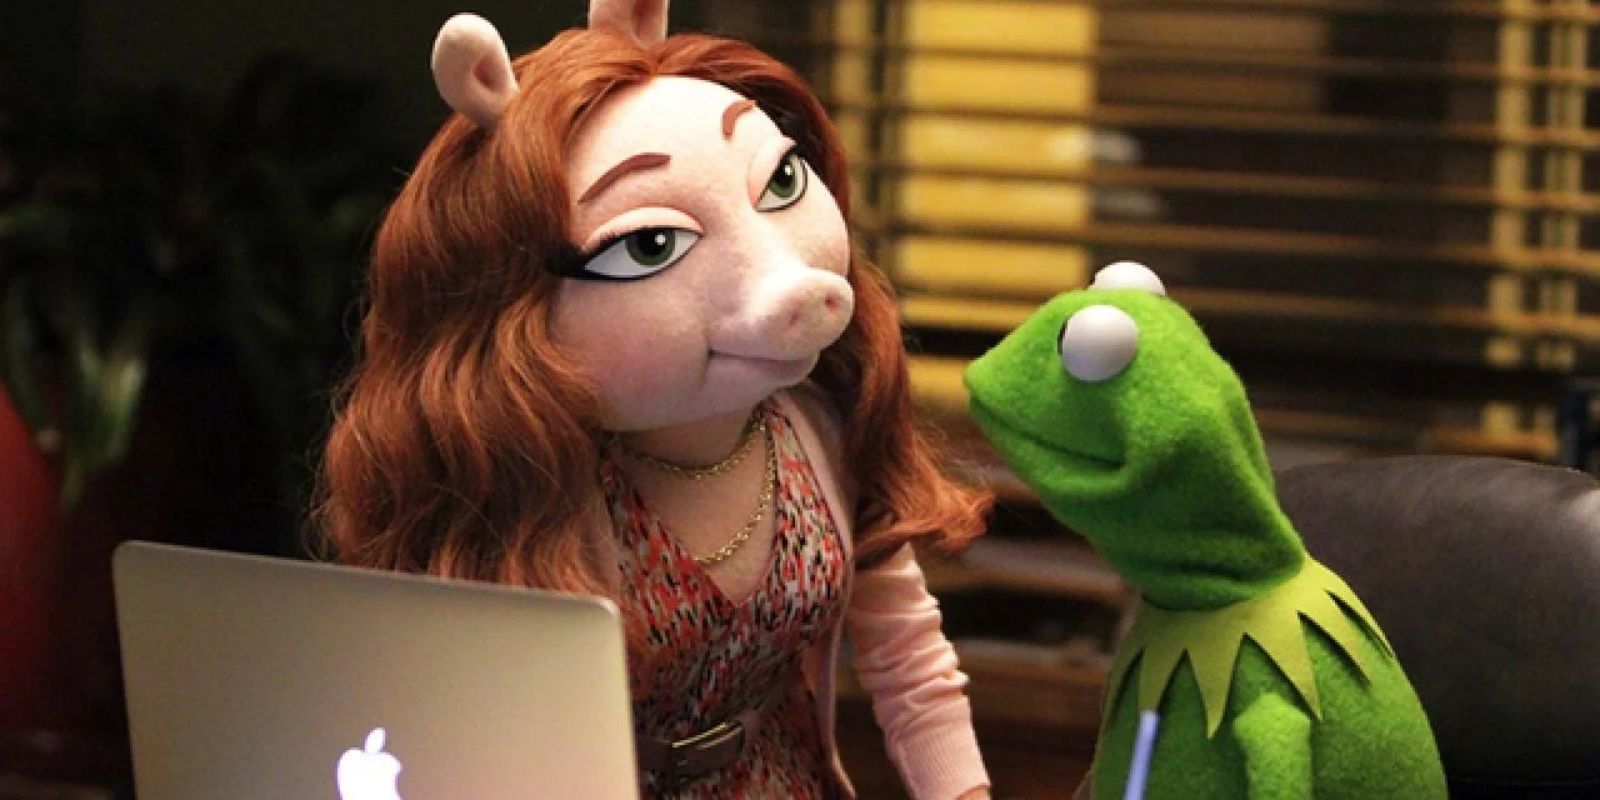 Denise and Kermit the Frog in The Muppets